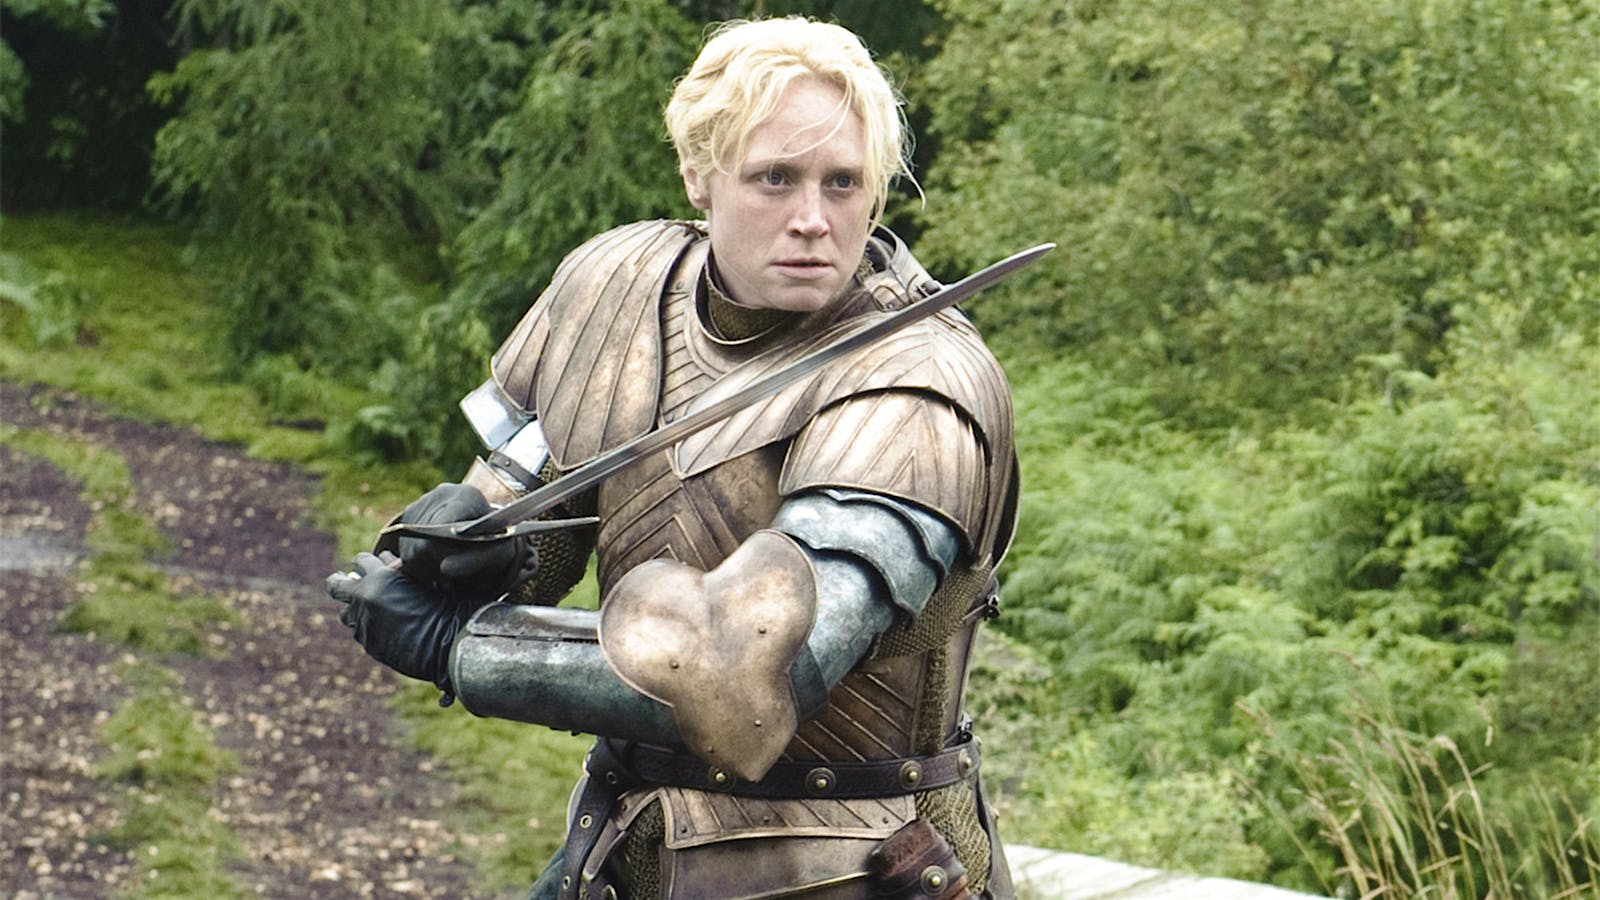 Game of Thrones Brienne of Tarth